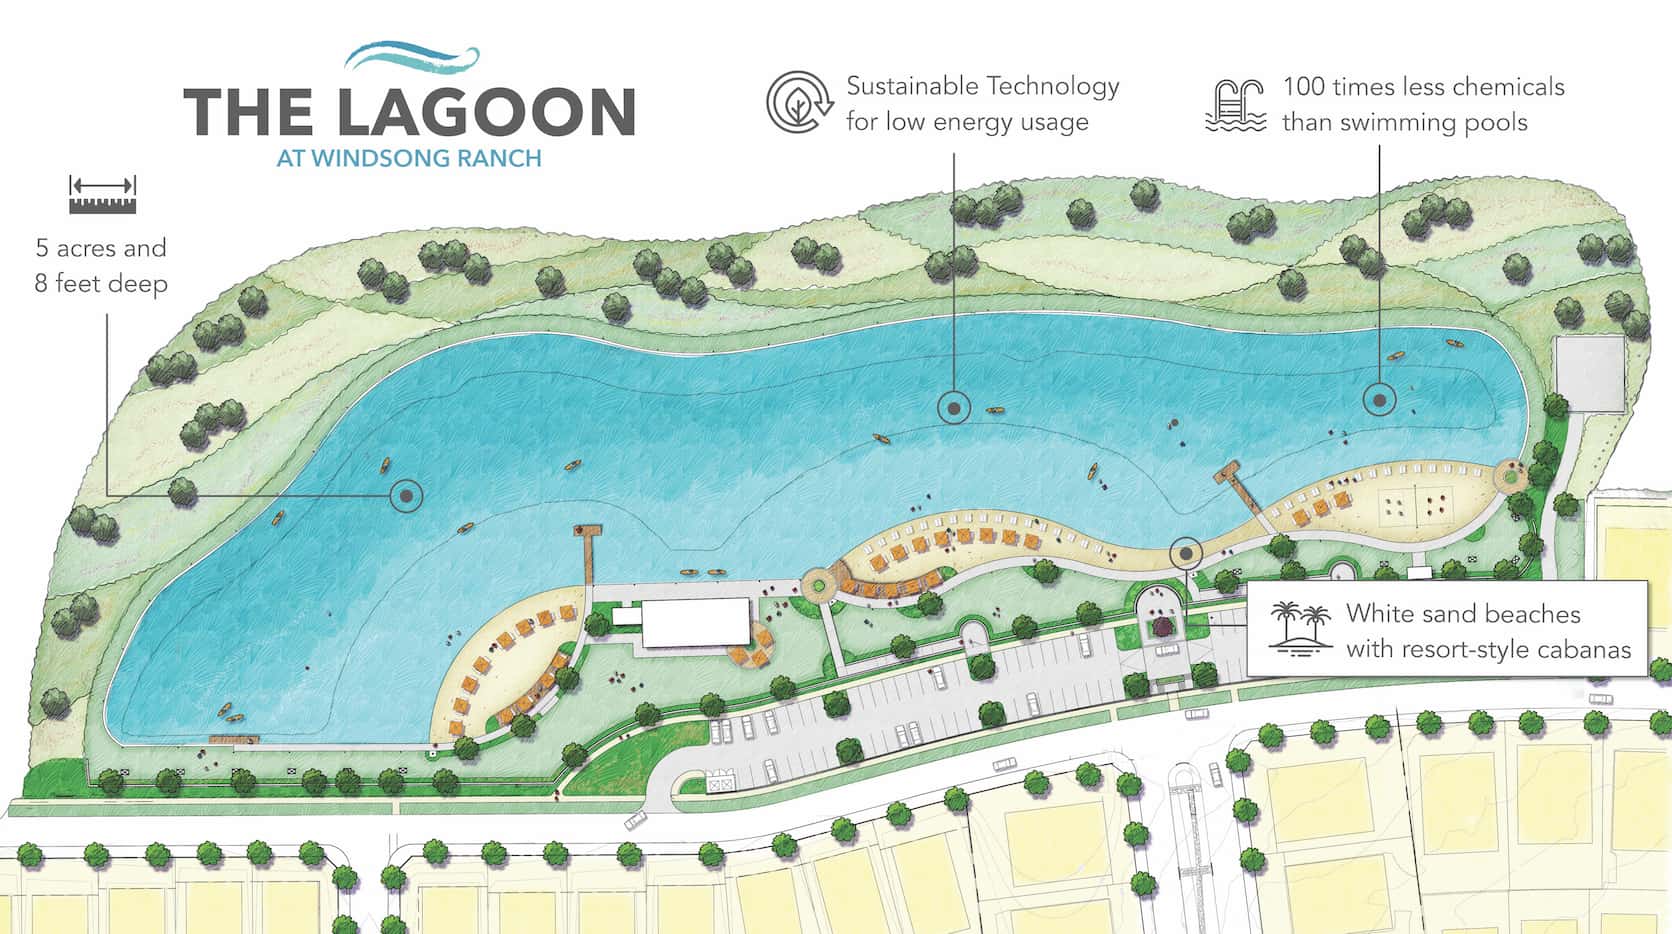 The Lagoon at Windsong Ranch will open in 2019.